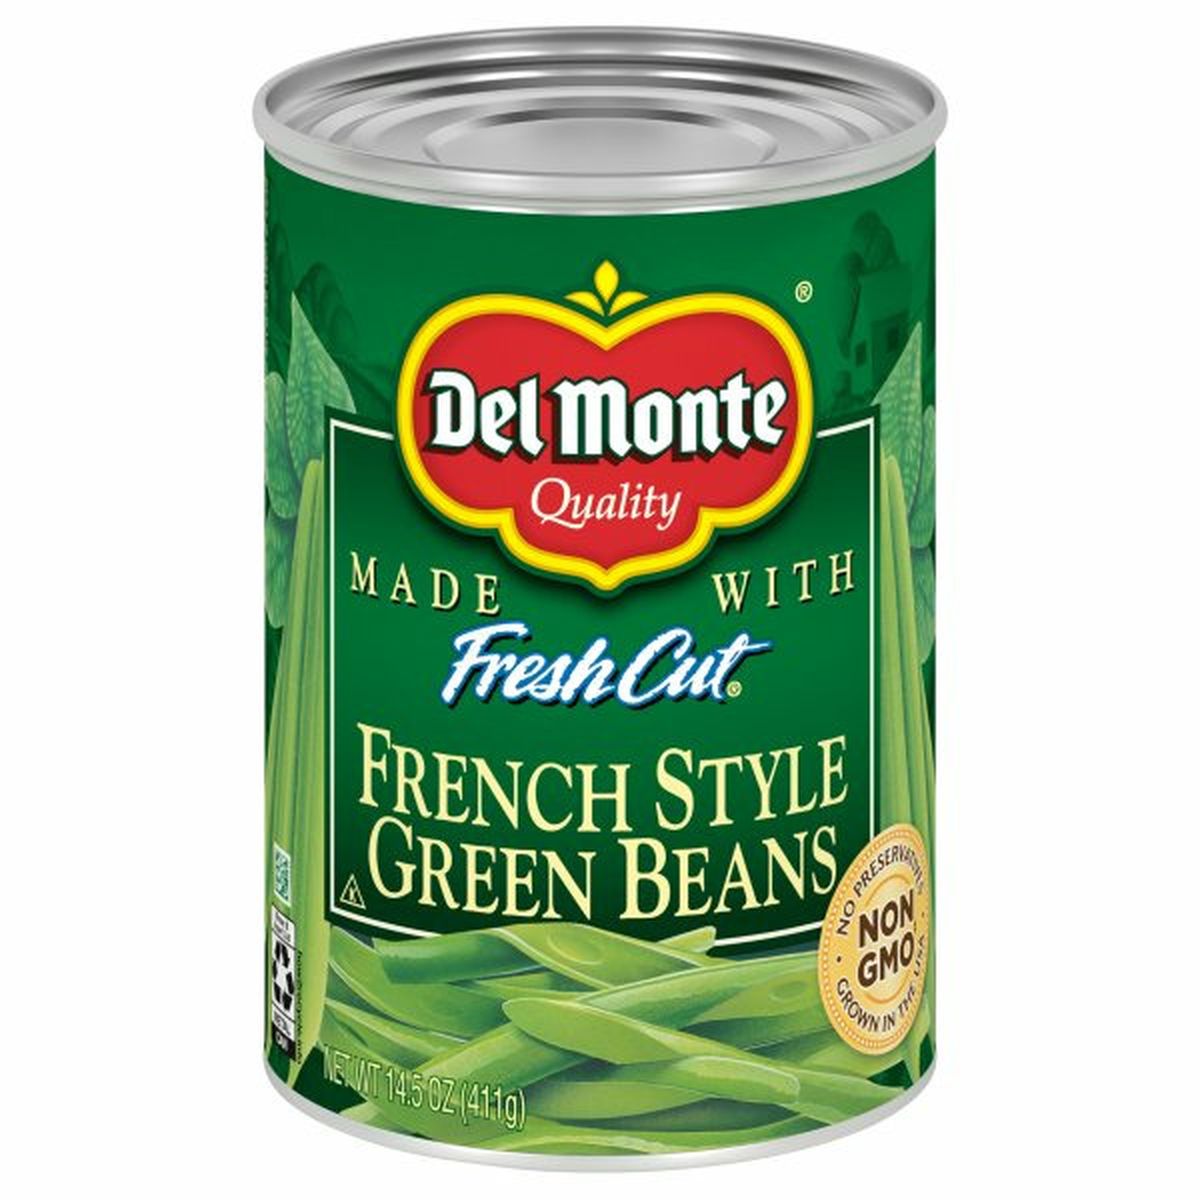 Calories in Del Monte Fresh Cut Green Beans, French Style